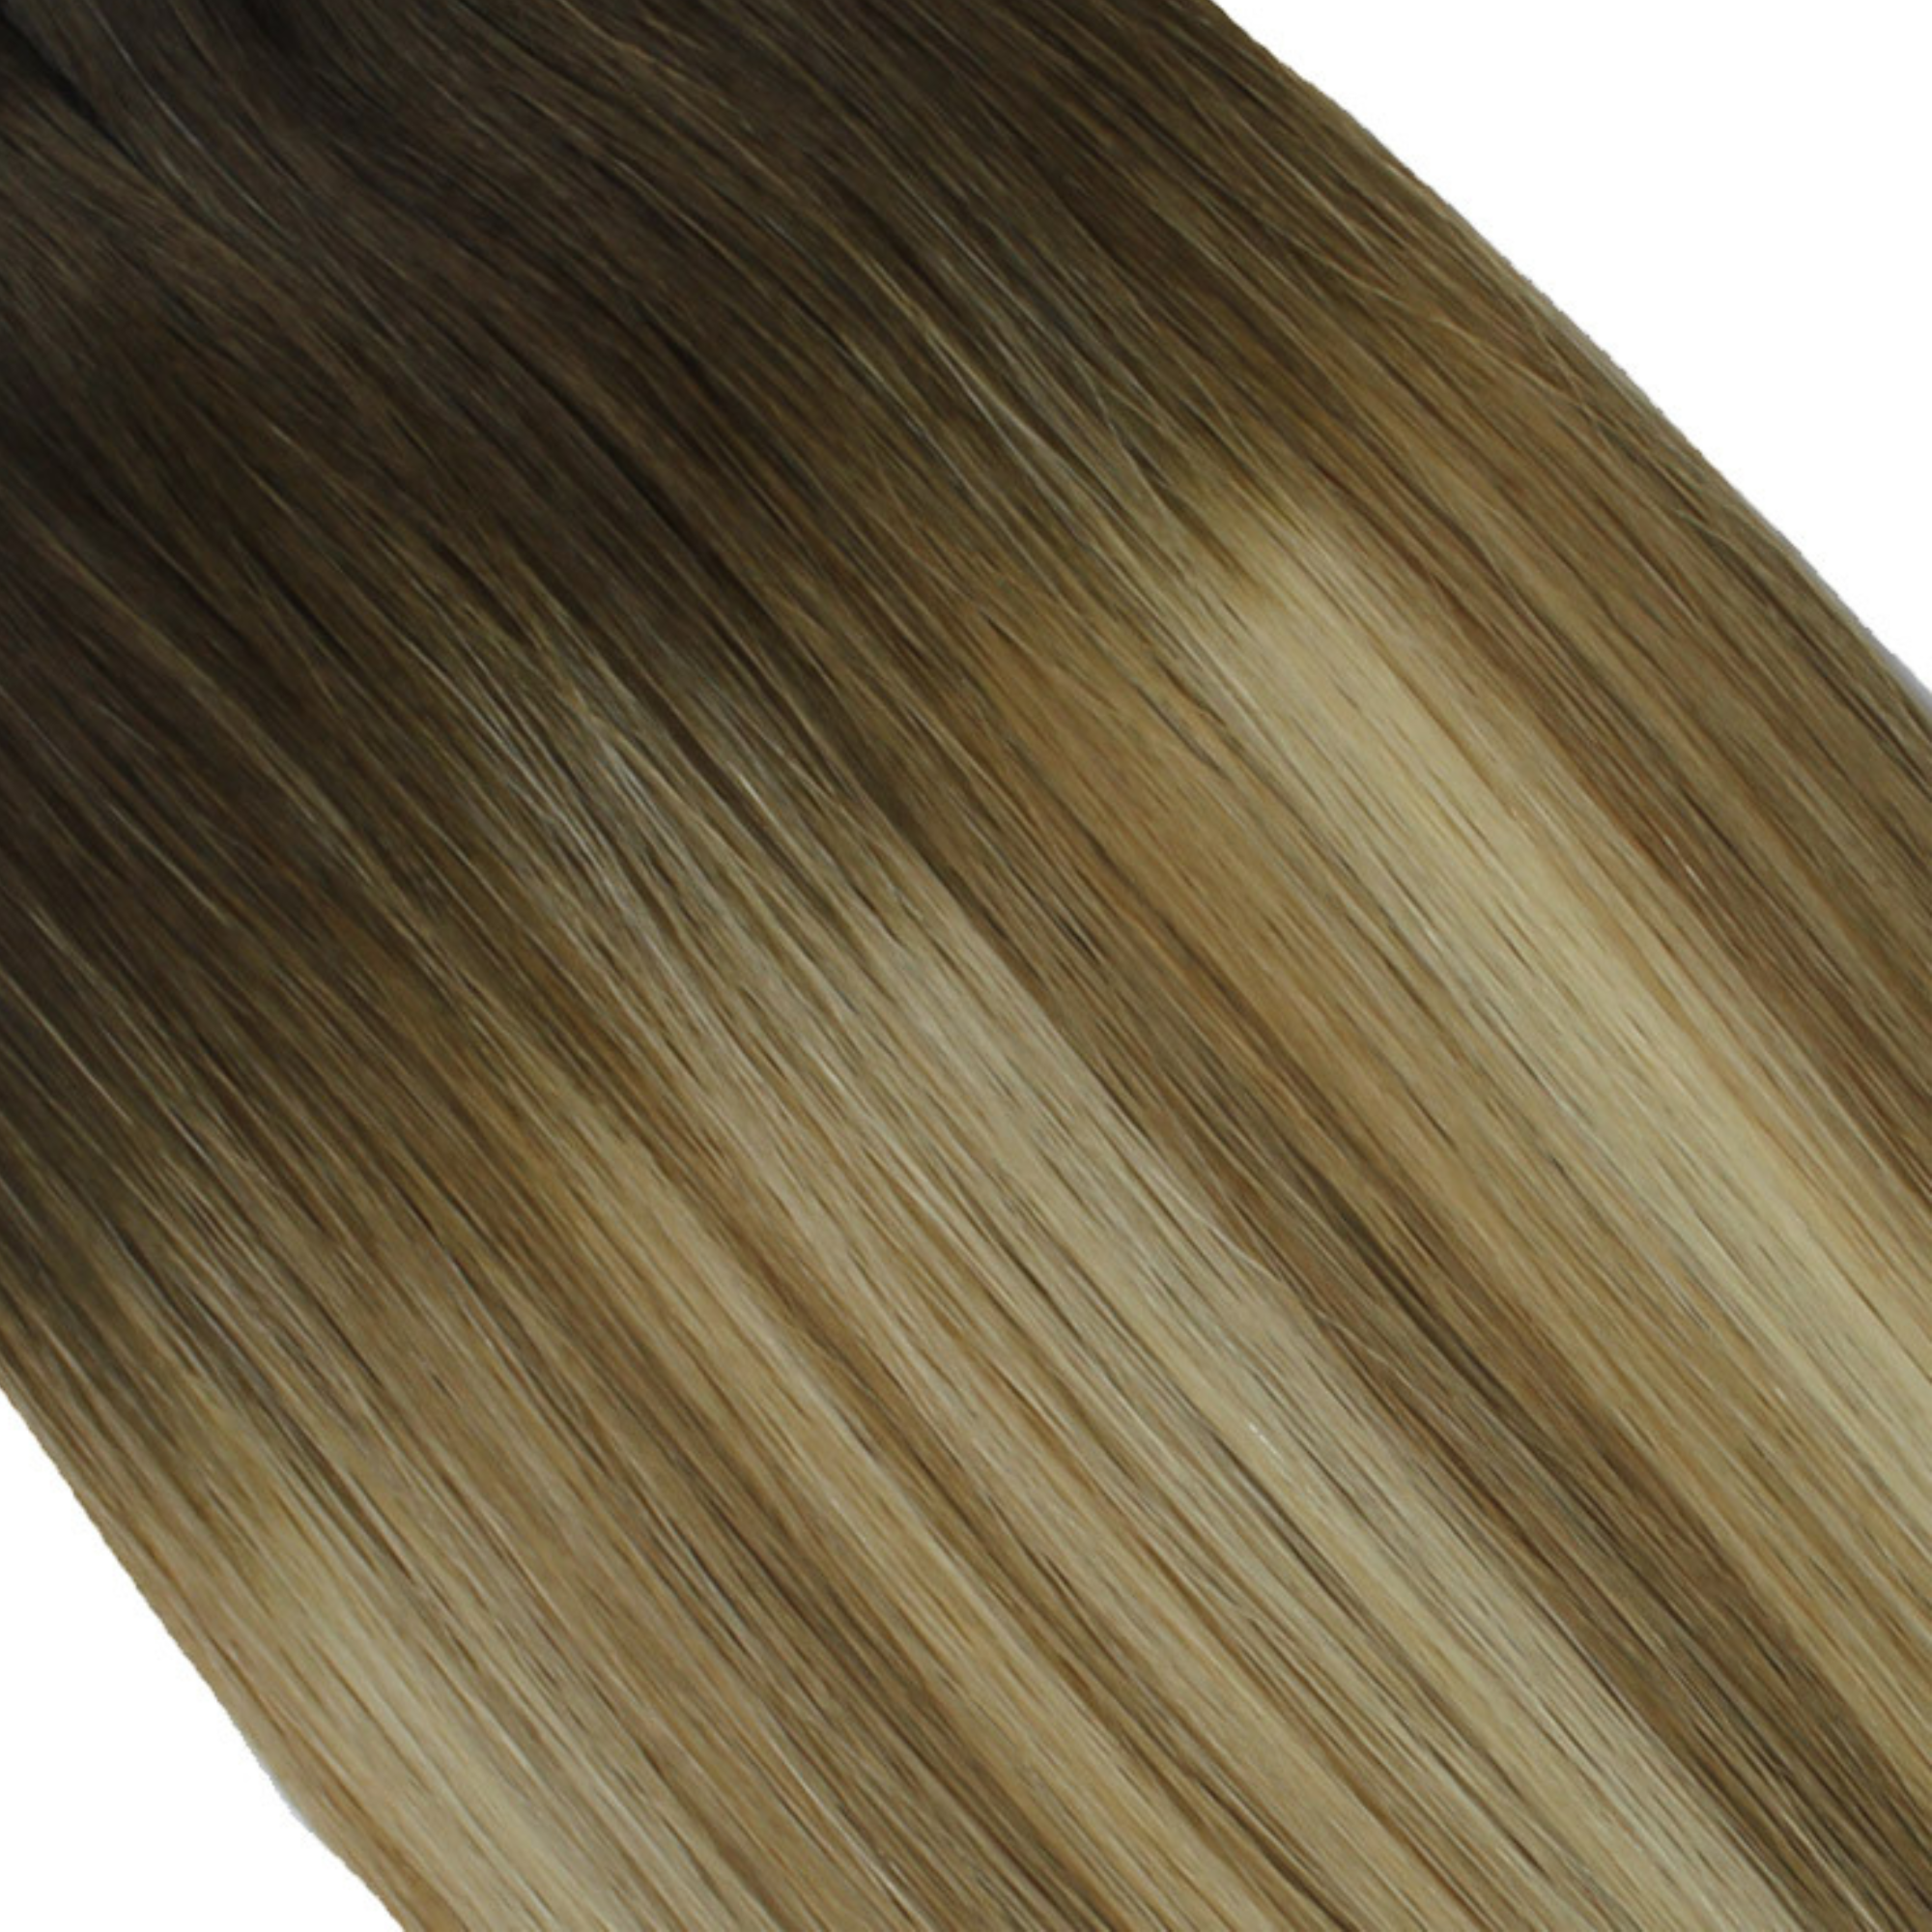 "hair rehab london 14" weft hair extensions shade swatch titled rooted supermodel"